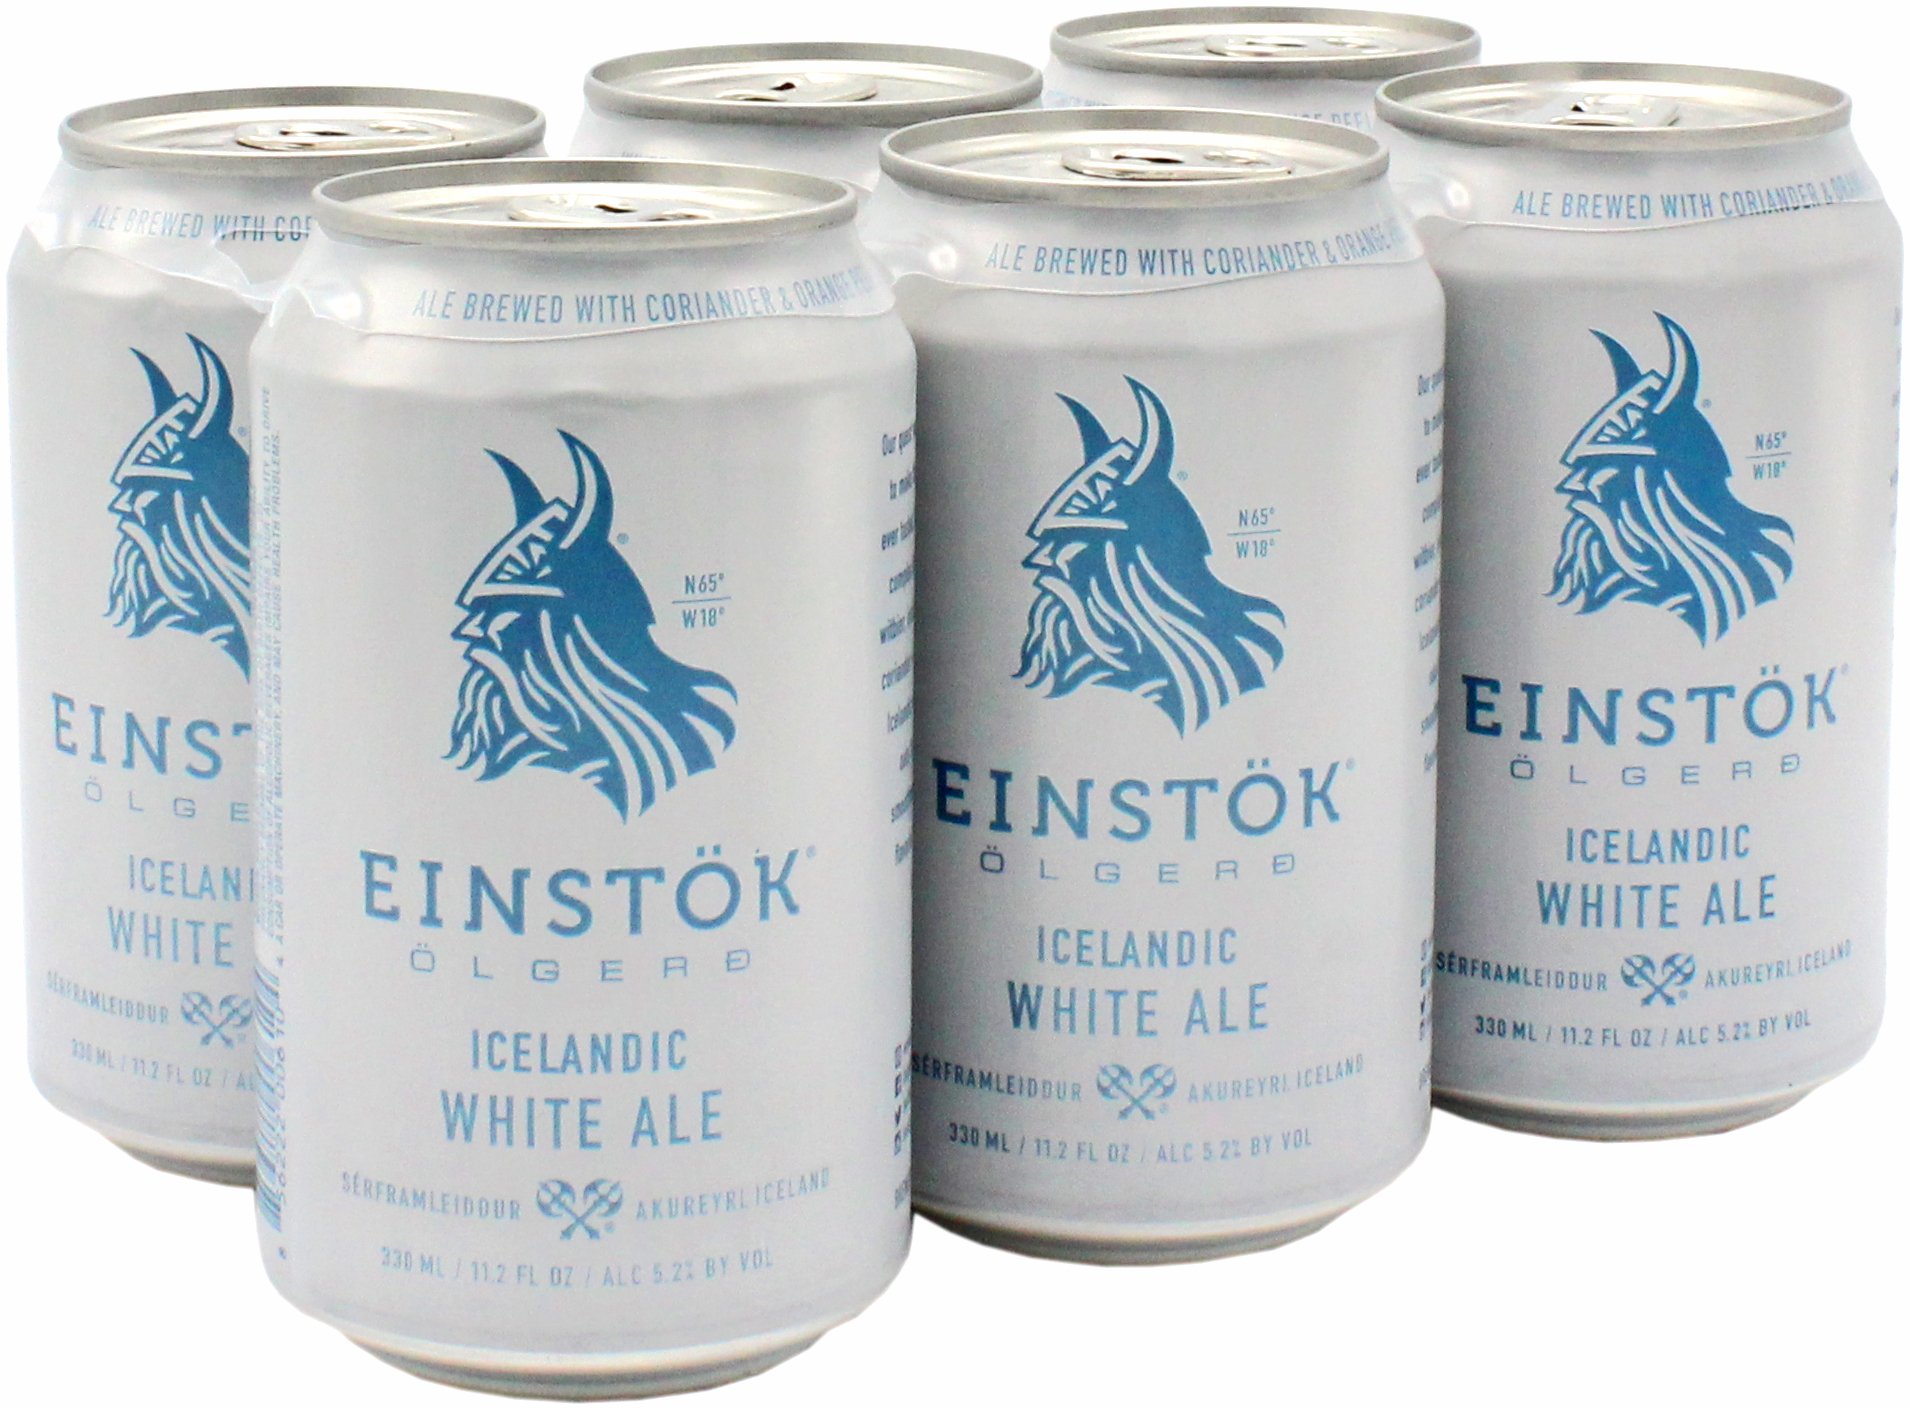 Einstock White Icelandic Ale Beer 6 pk Cans - Shop Beer at H-E-B